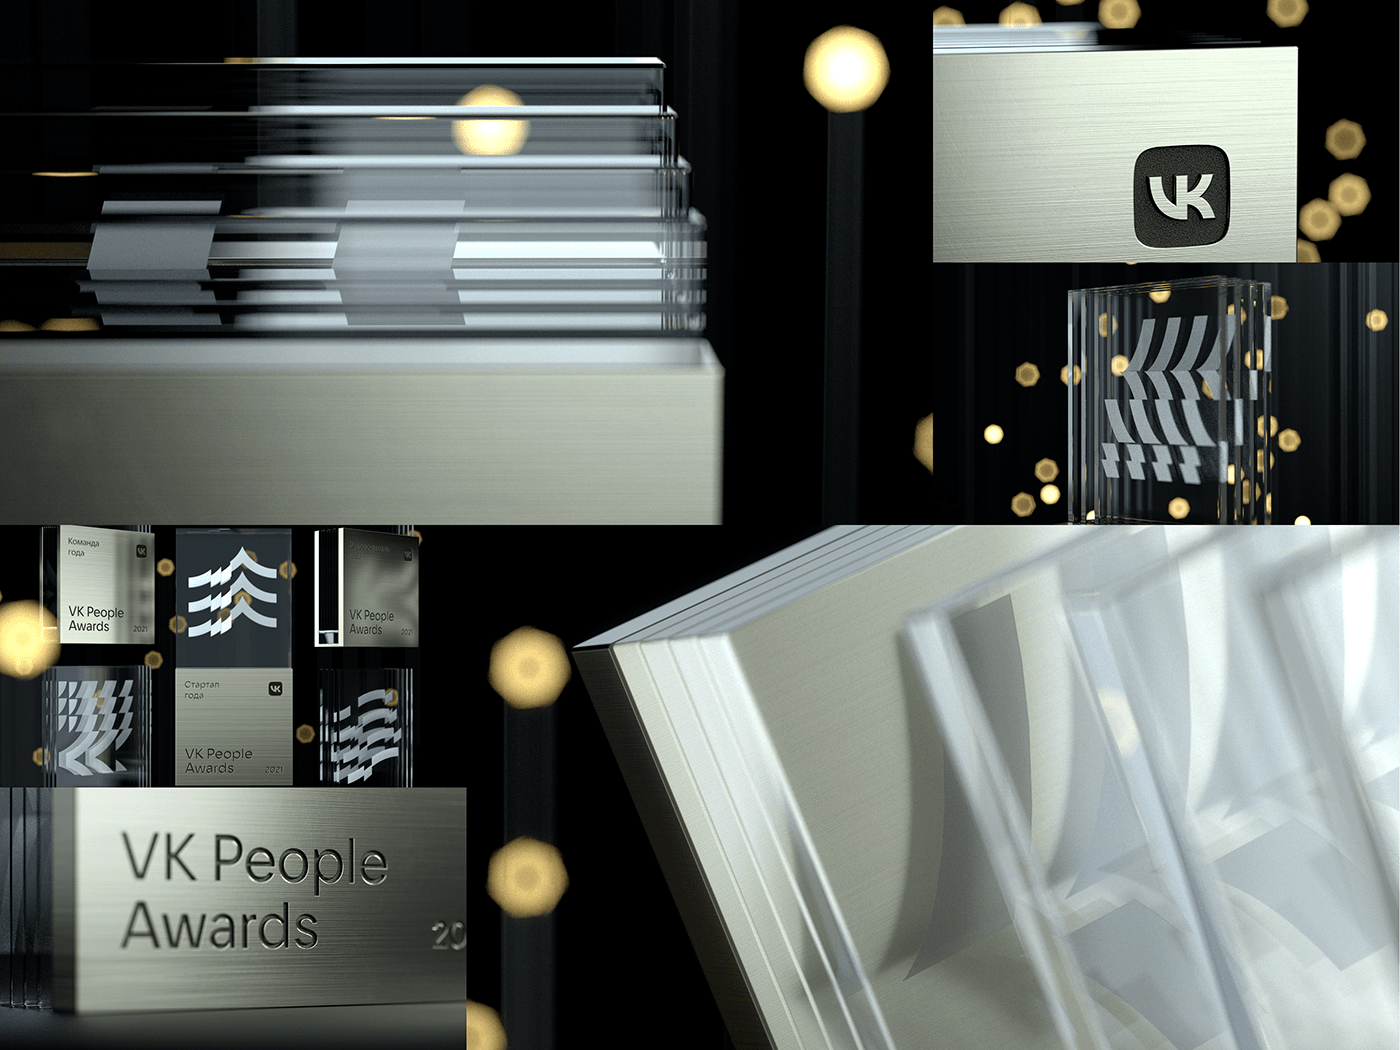 3D after effects animation  award ceremony color glass pattern trophy winners